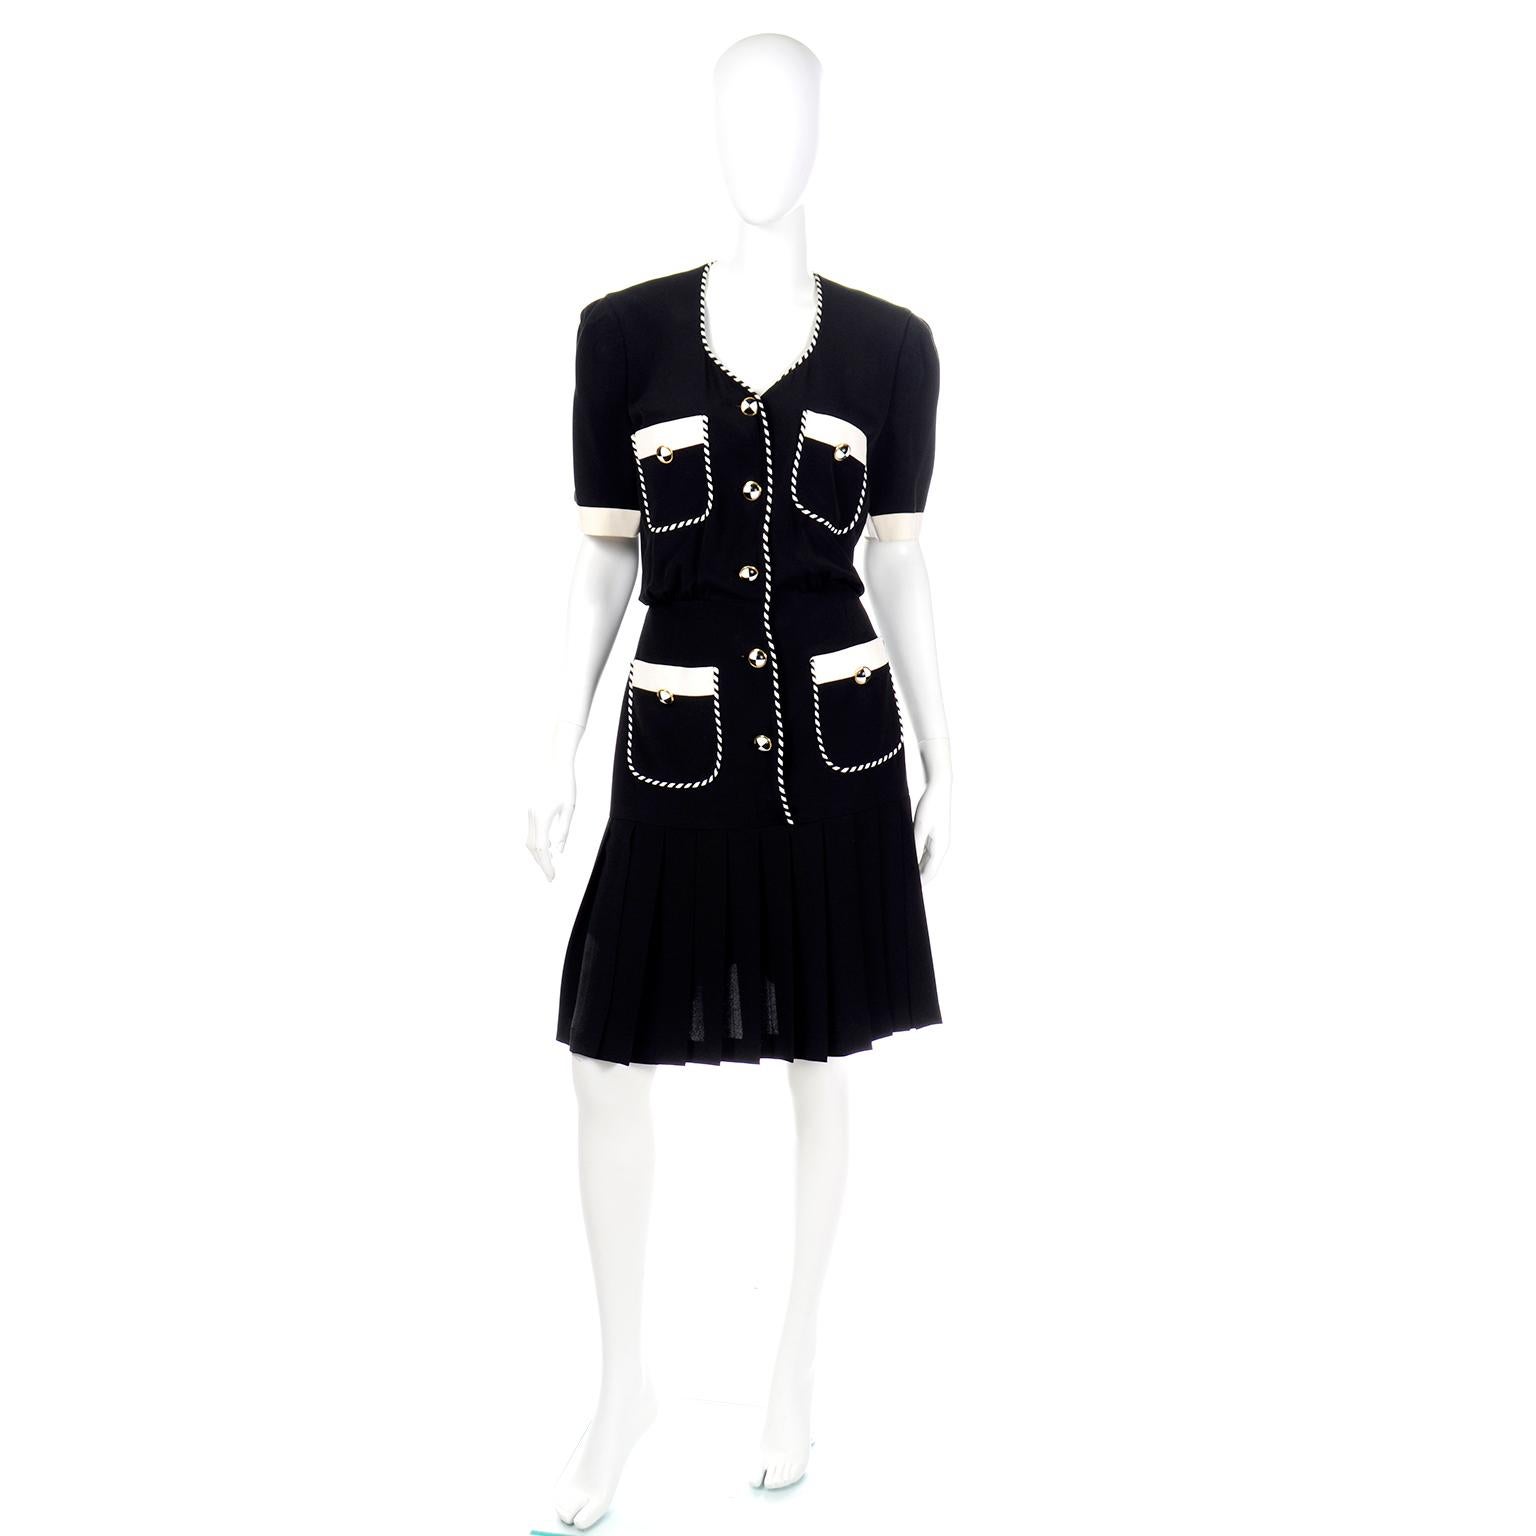 This is a really fun vintage Margaretha Ley for Escada black short sleeve dress with ivory trim and black and white striped piping.  The lower portion of skirt is beautifully pleated and the waist is gently gathered. We love Escada buttons and these